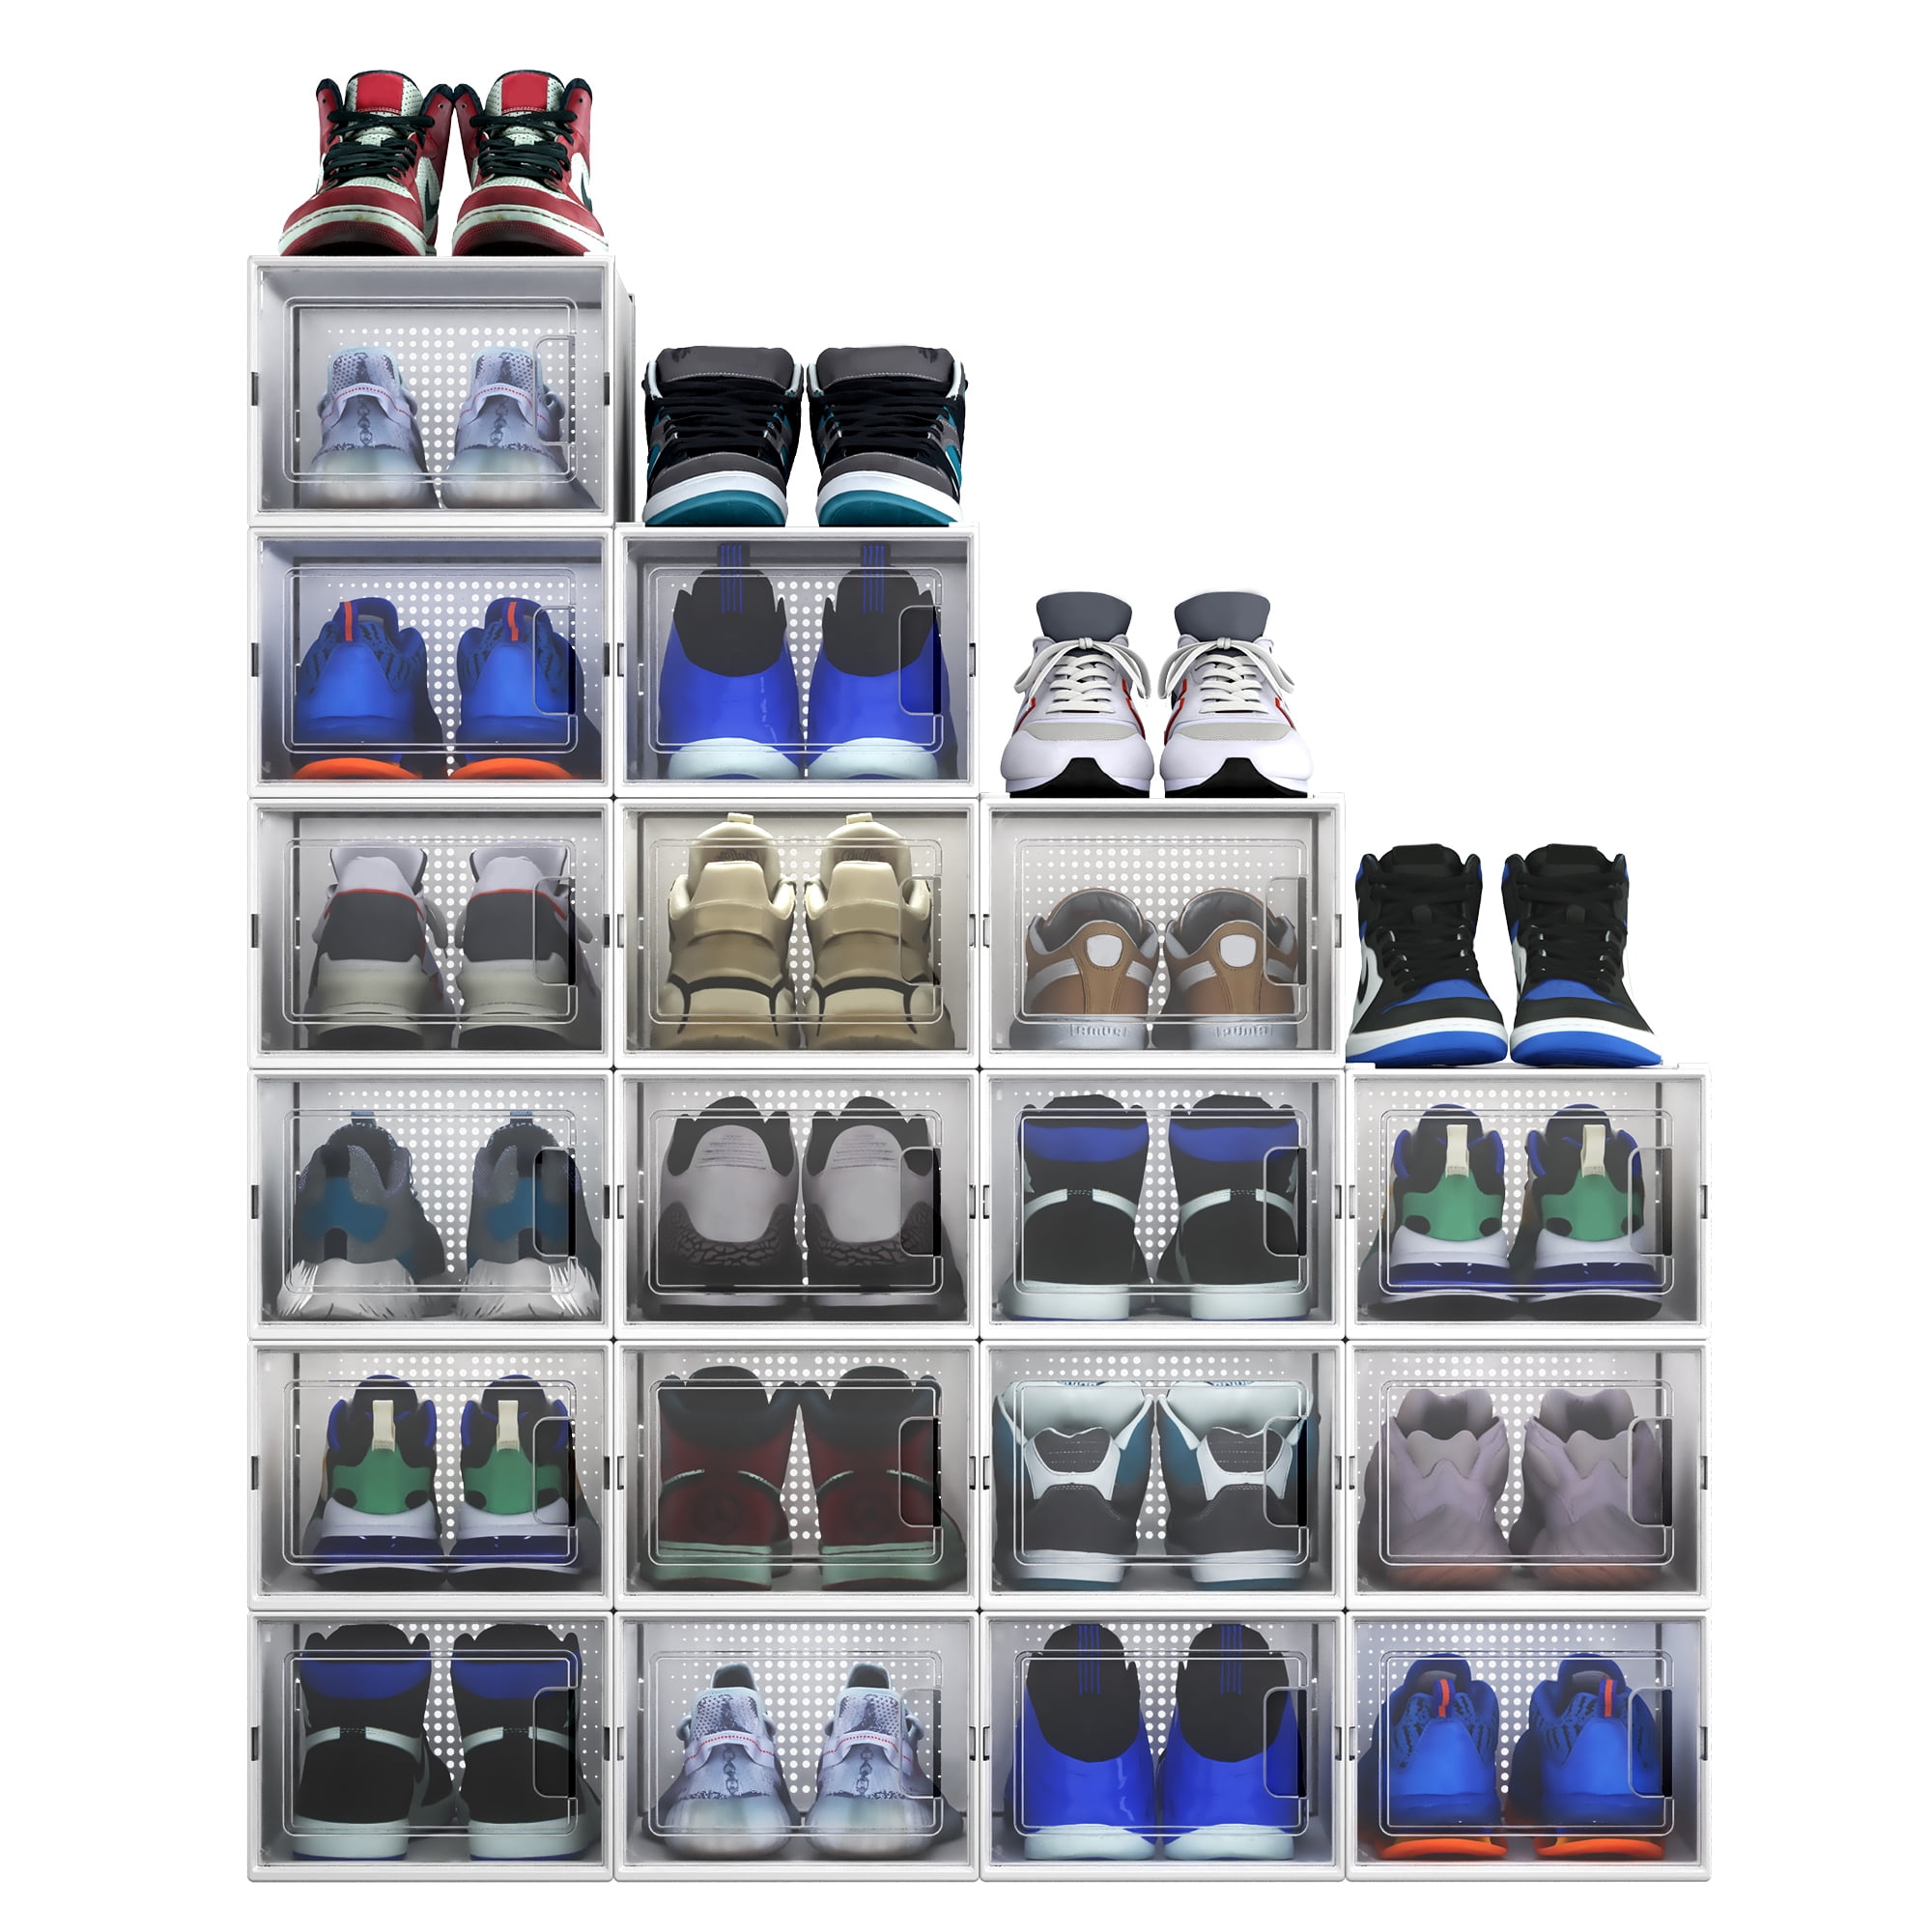 DHMAKER Shoe Boxes Clear Plastic Stackable, 18 Pack Shoe Organizer for  Closet, Space Saving Foldable Shoe Sneaker Containers Bins Holders